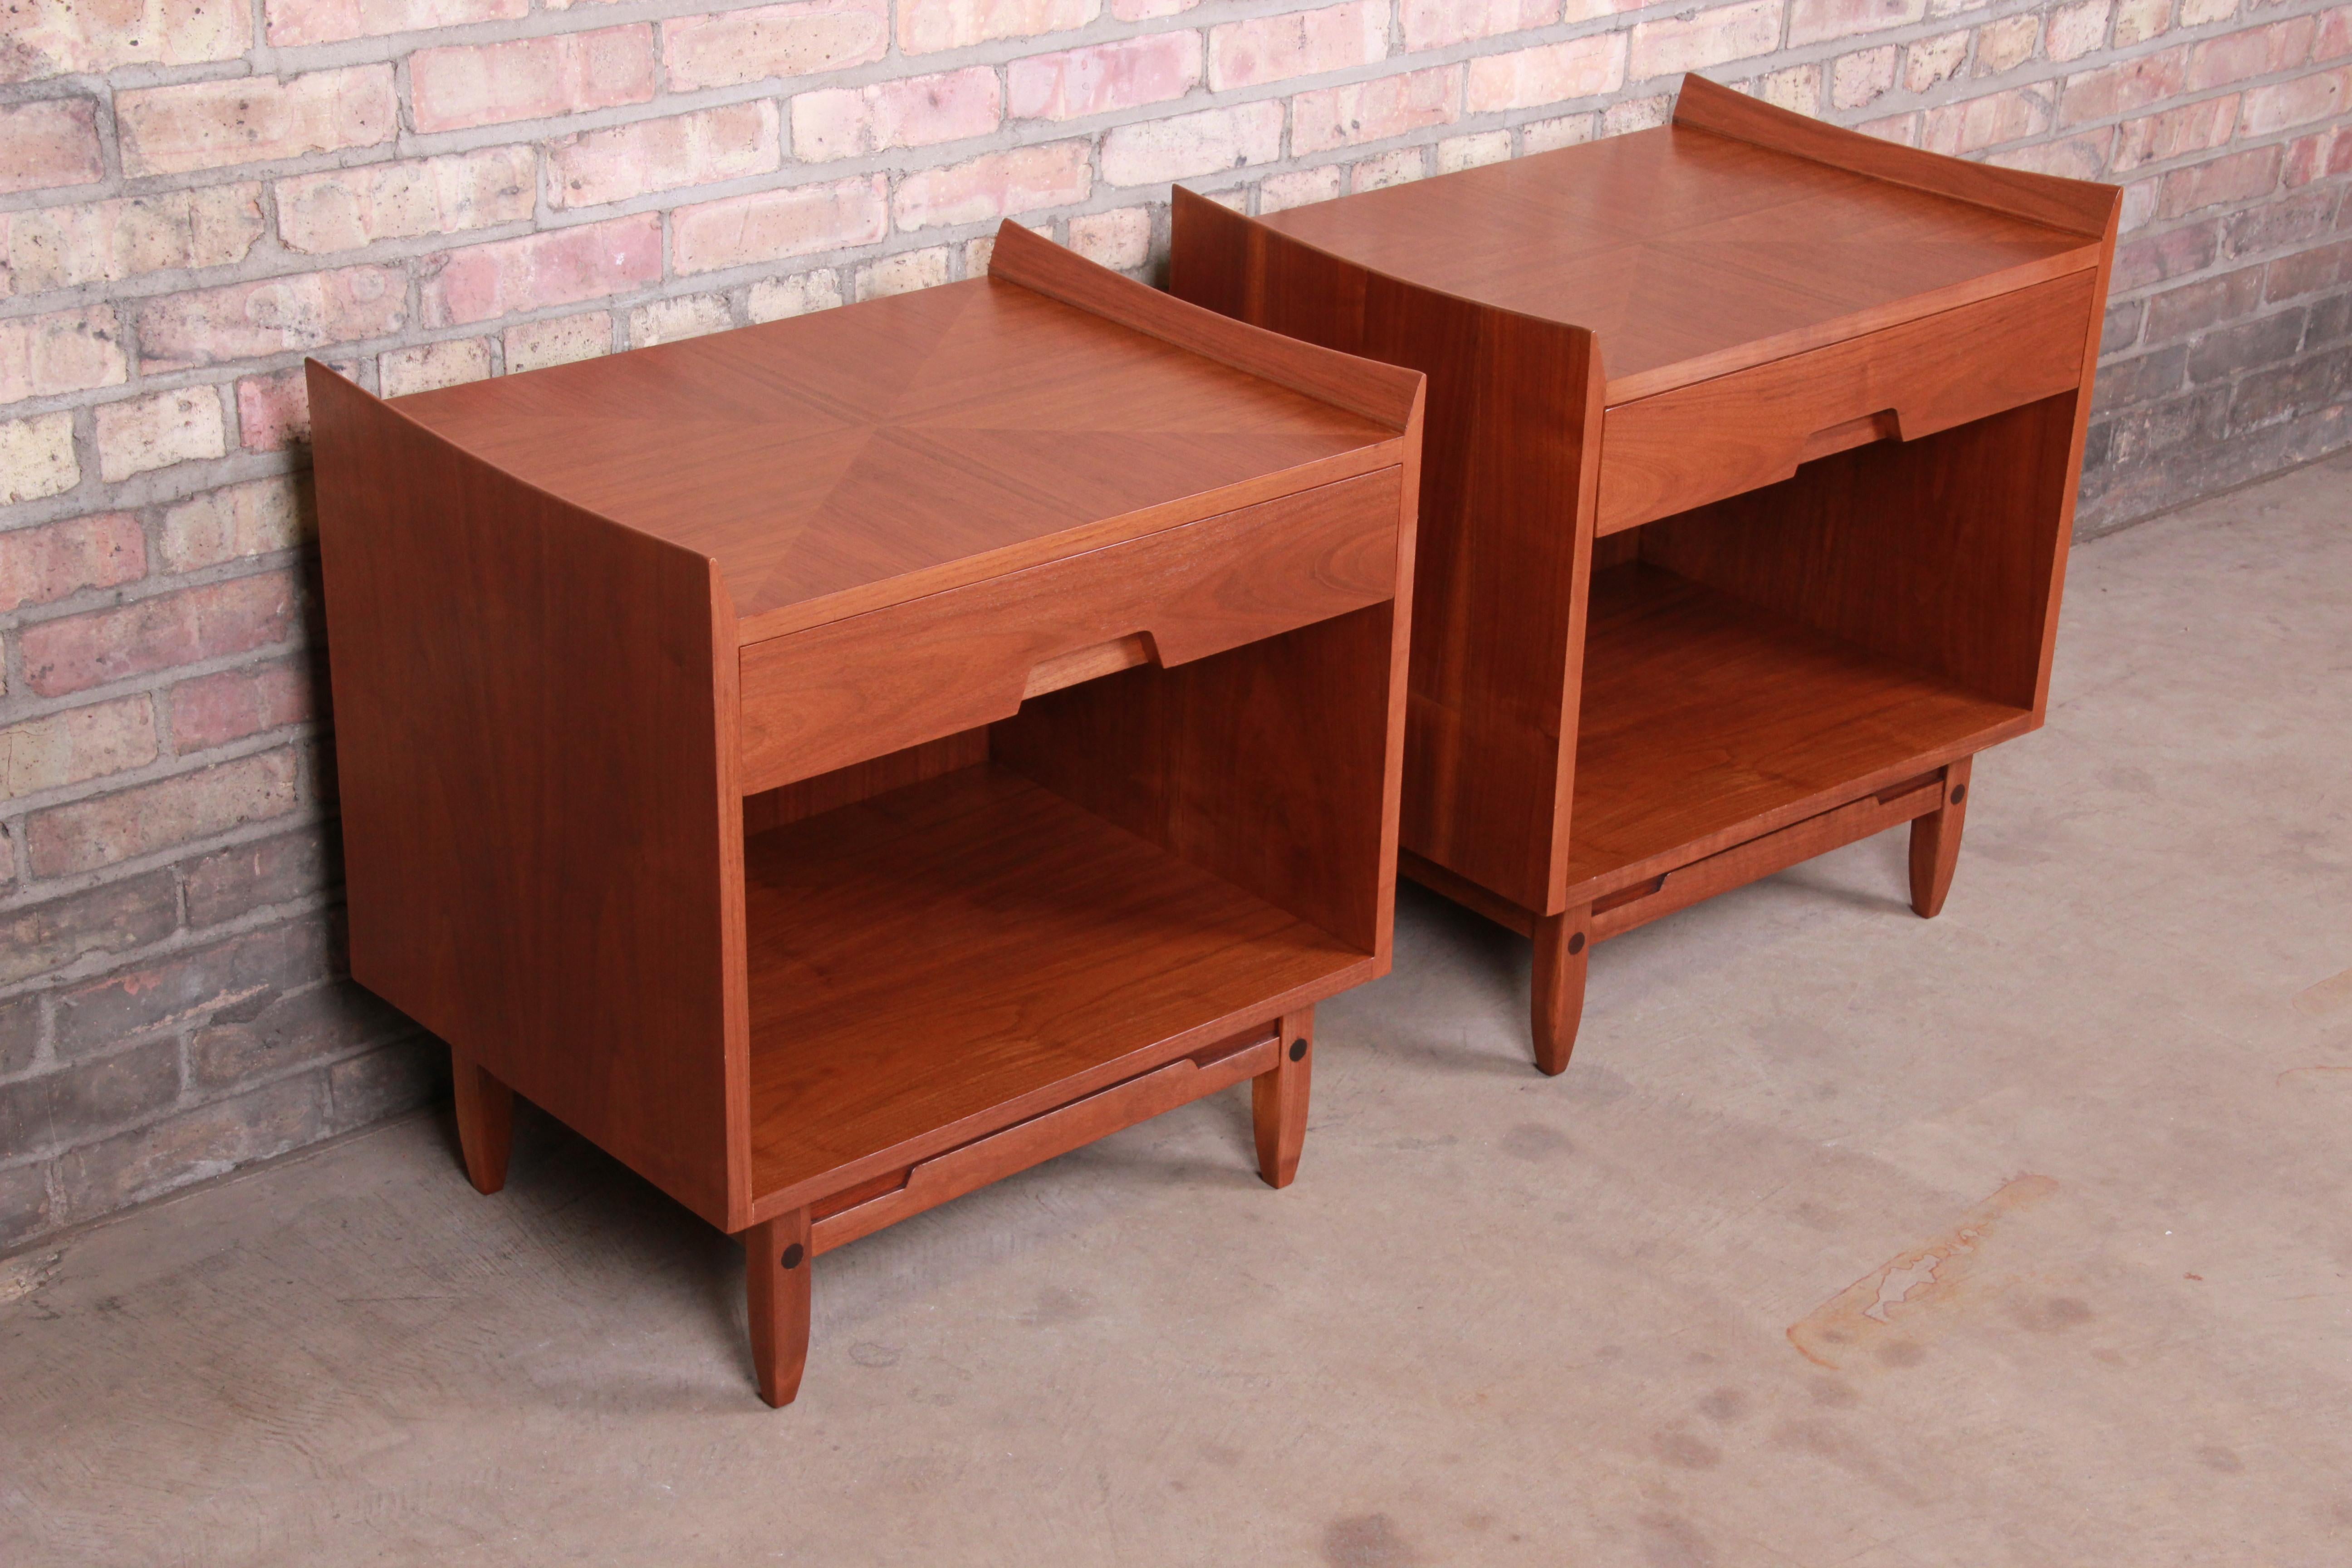 20th Century Mid-Century Modern Sculpted Walnut Nightstands by Bethlehem Furniture, Restored For Sale